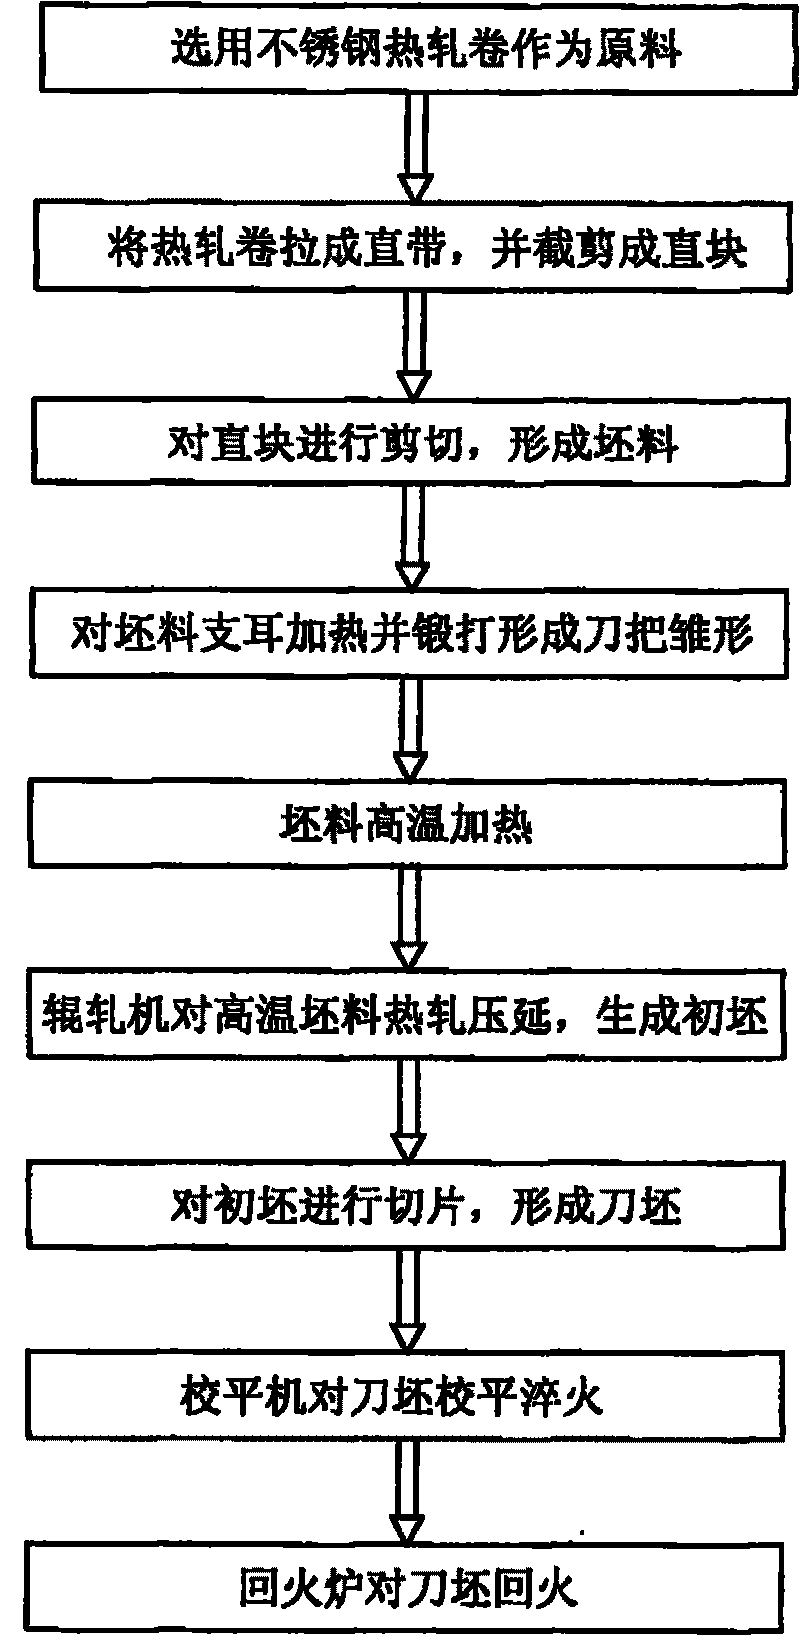 Method for processing cutter blank of kitchen knife